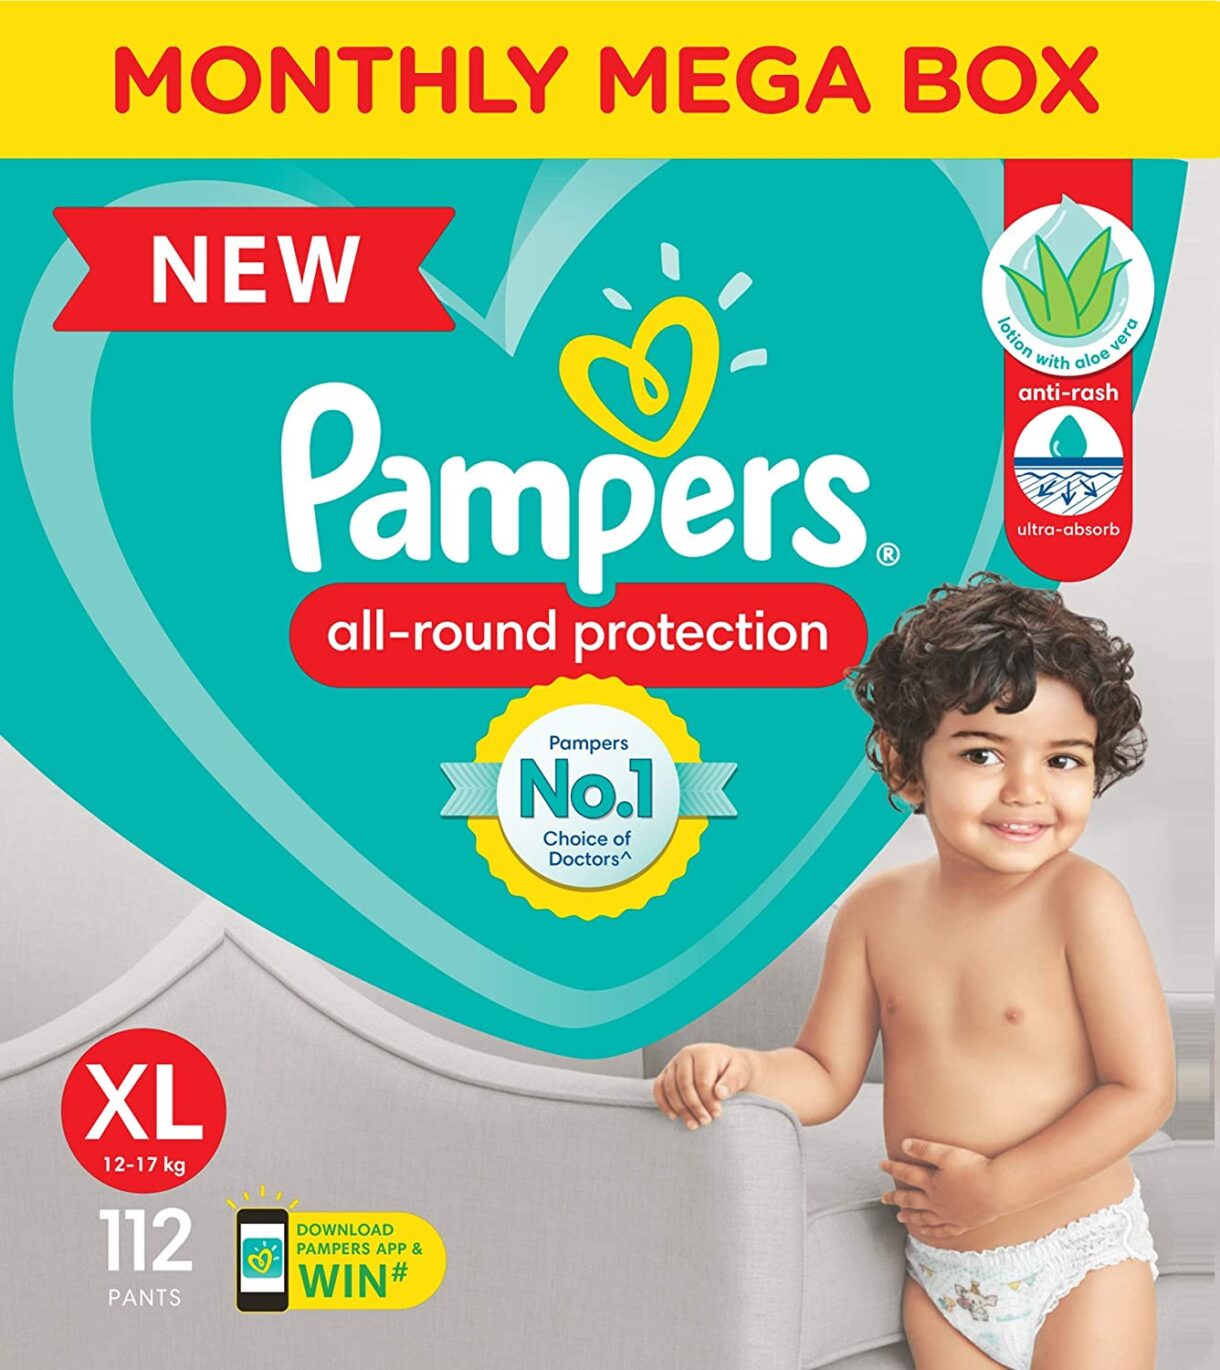 Pampers All round Protection Pants, Extra Large size baby diapers (XL) 112 Count, Lotion with Aloe Vera